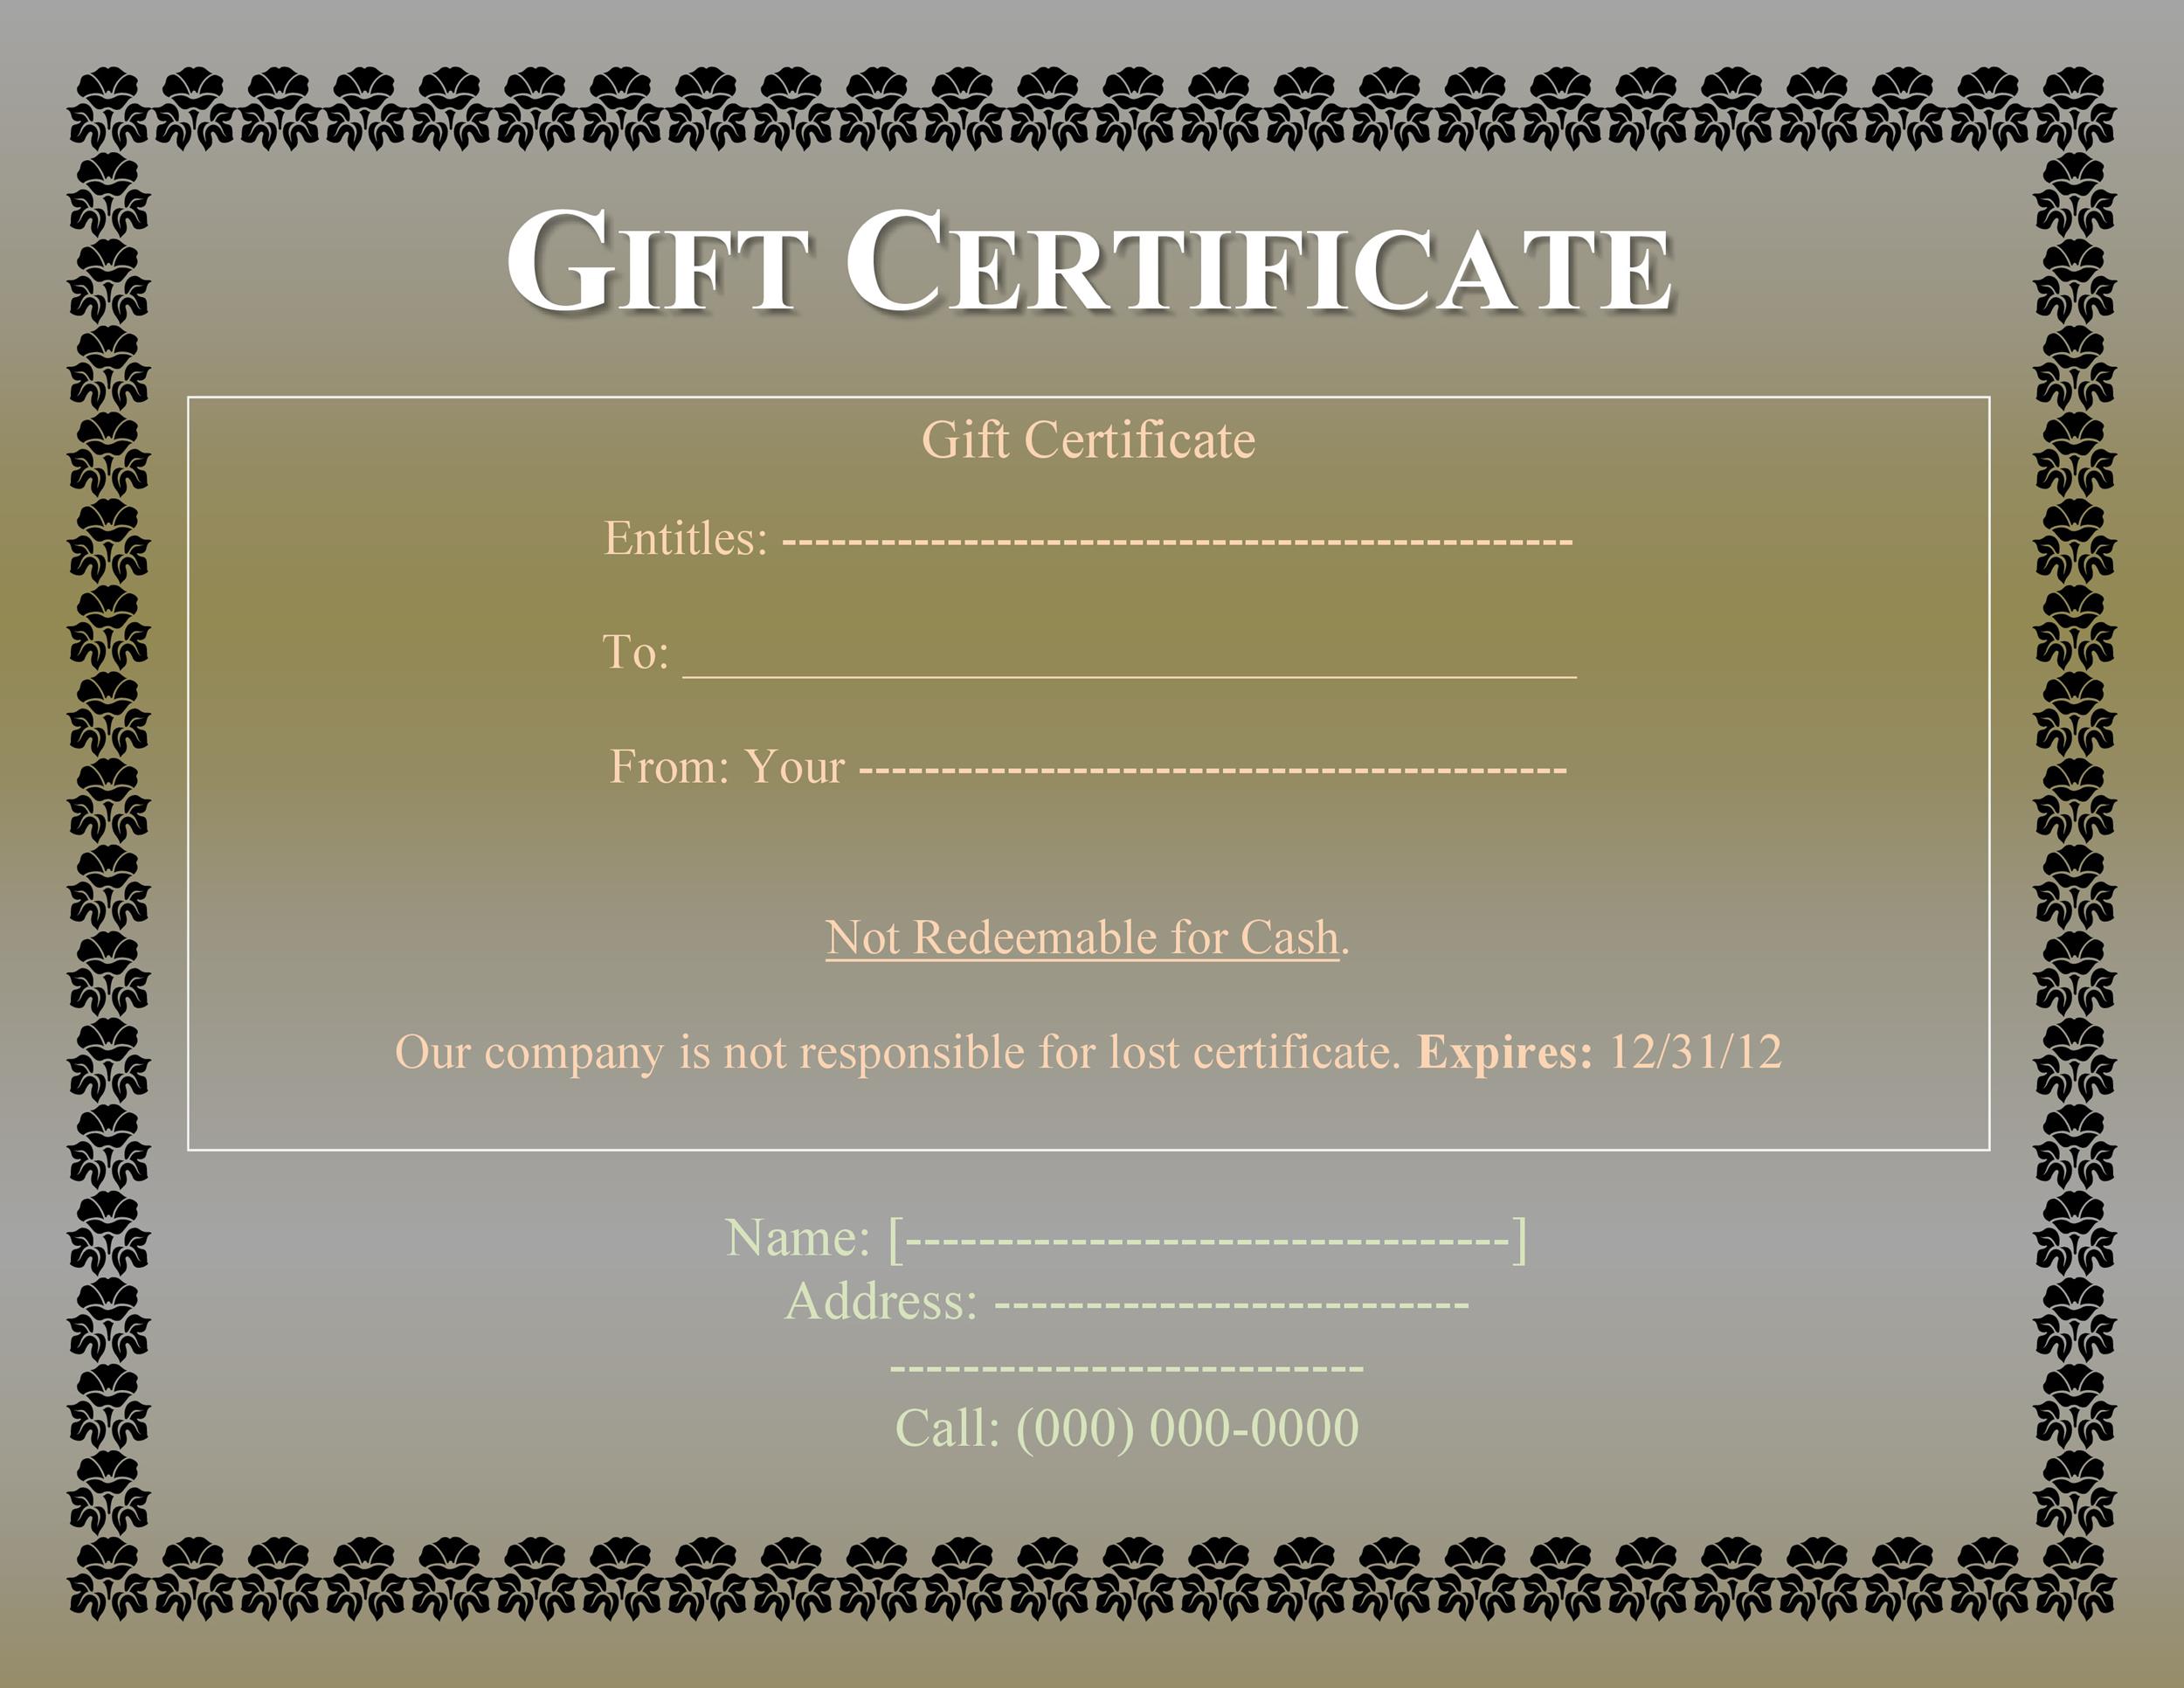 31 Free Gift Certificate Templates TemplateLab